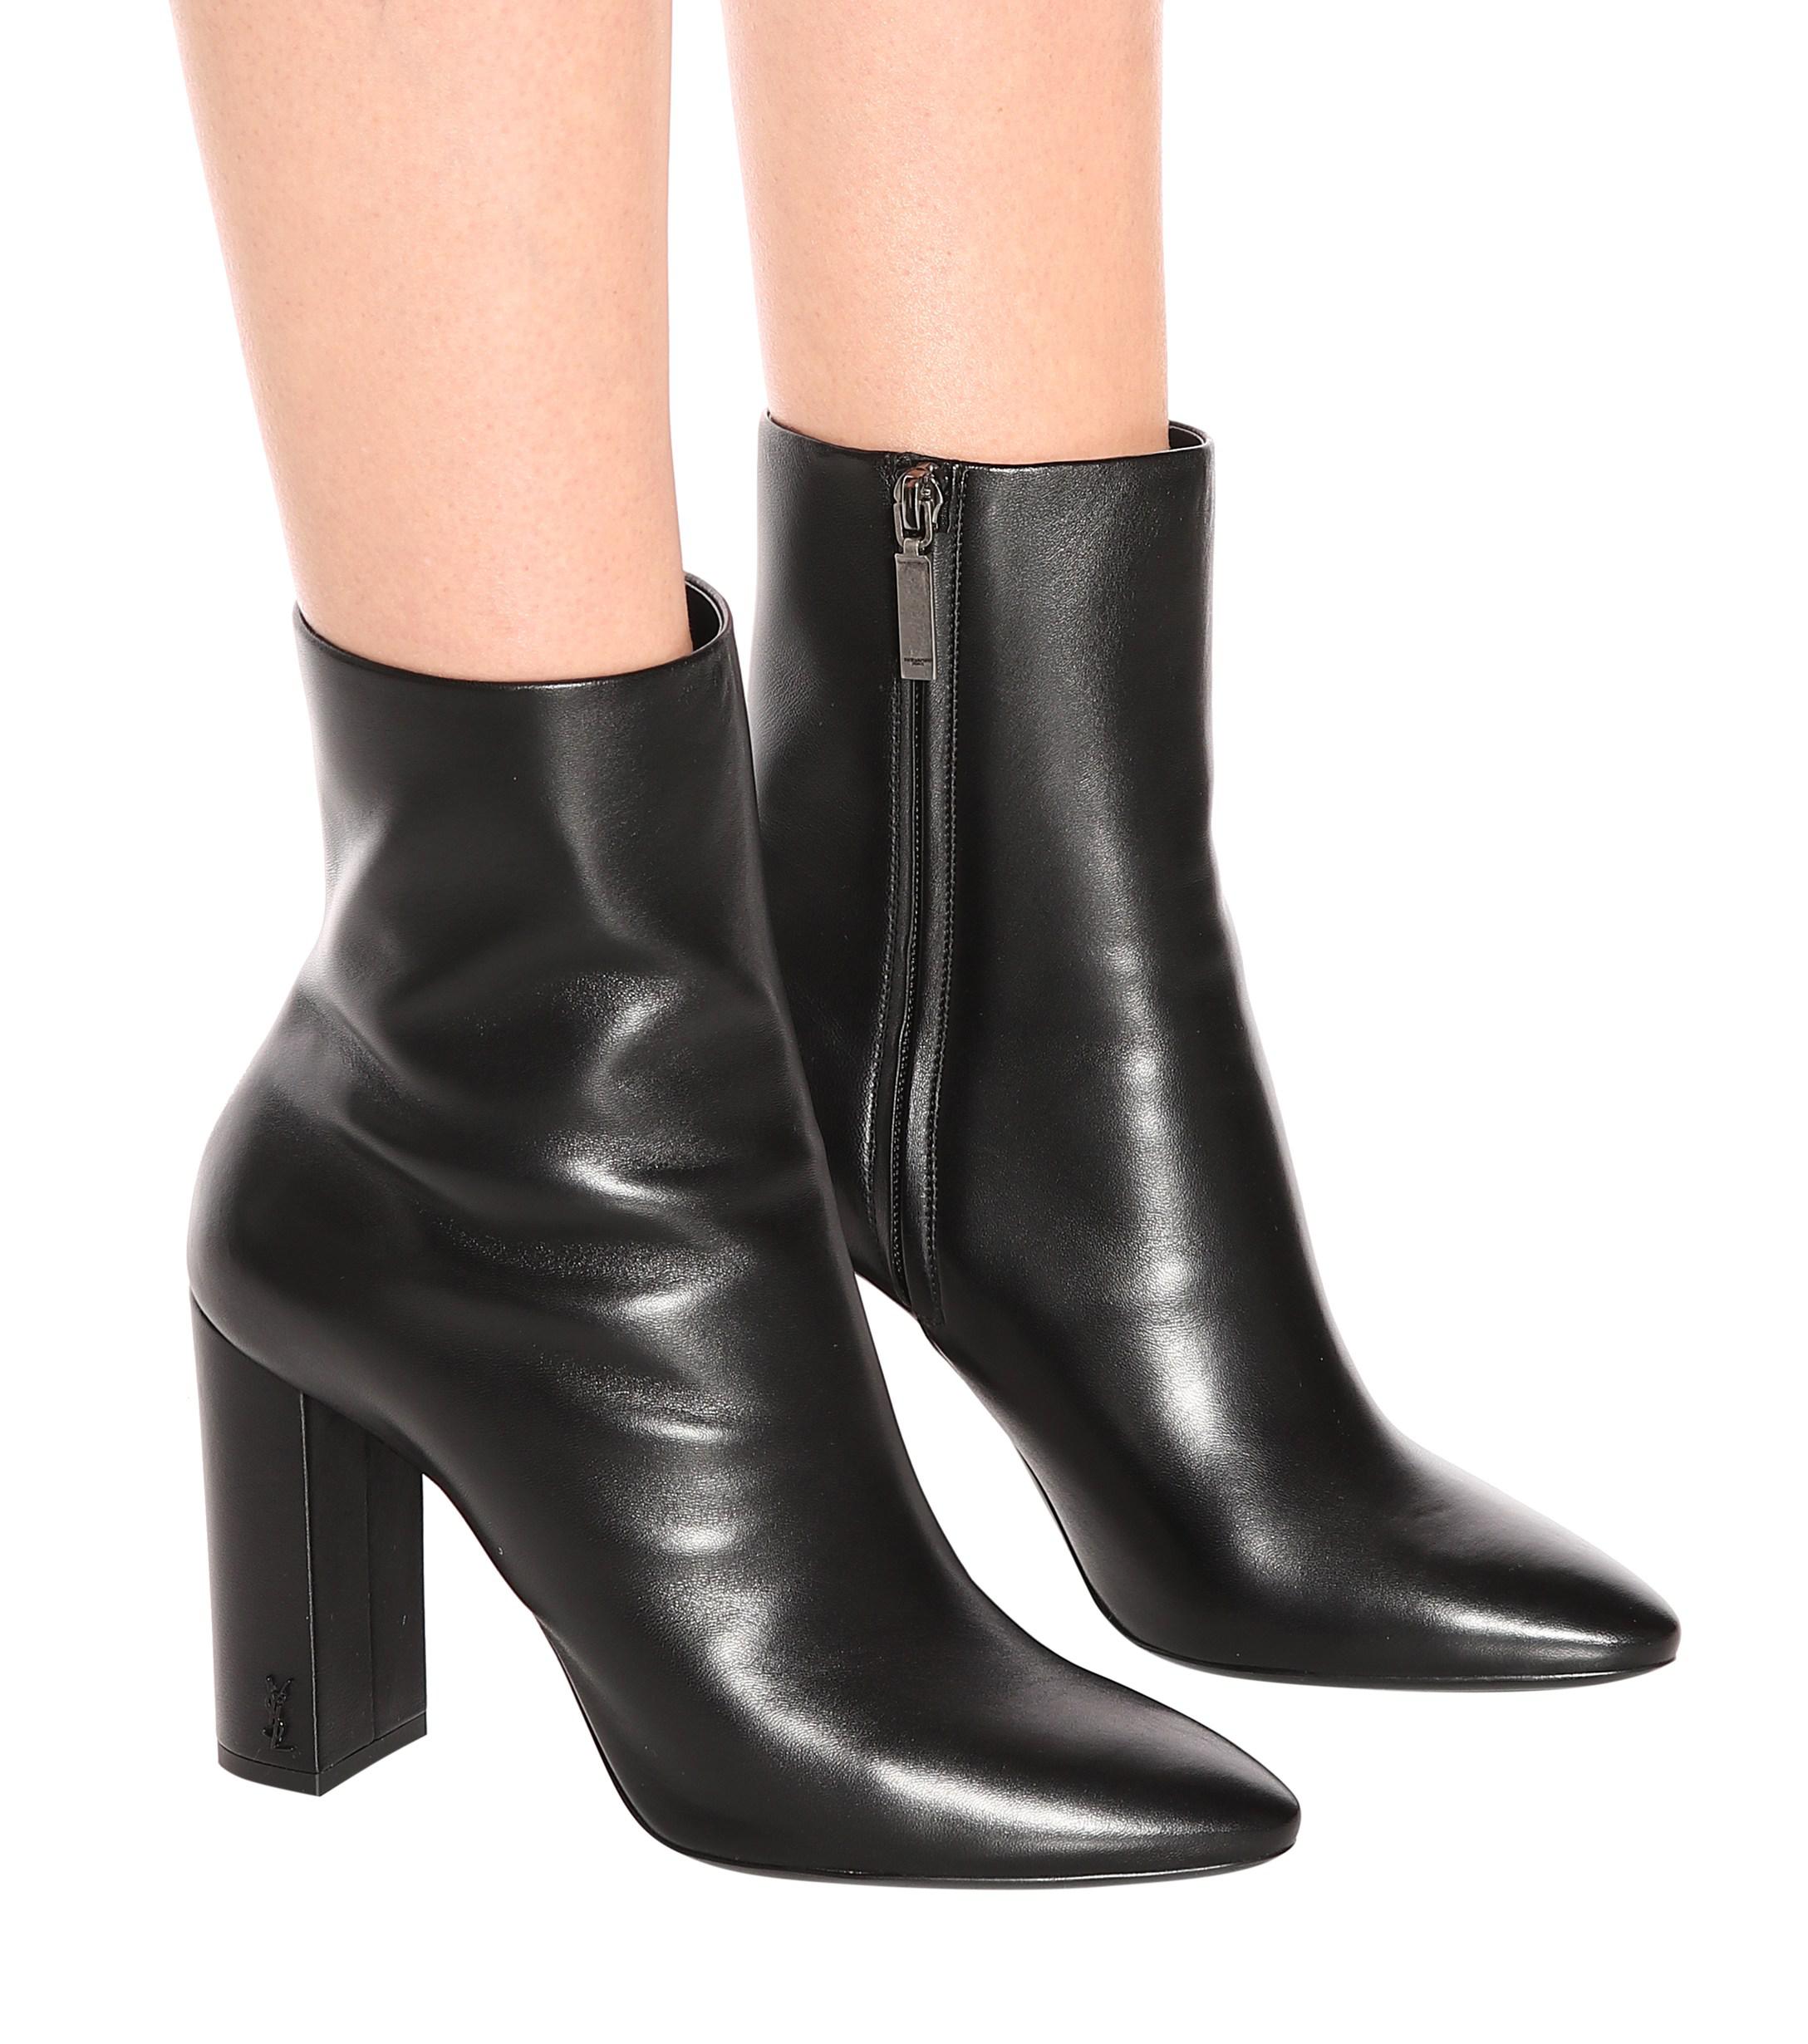 Saint Laurent Lou 95 Leather Ankle Boots in Black - Lyst